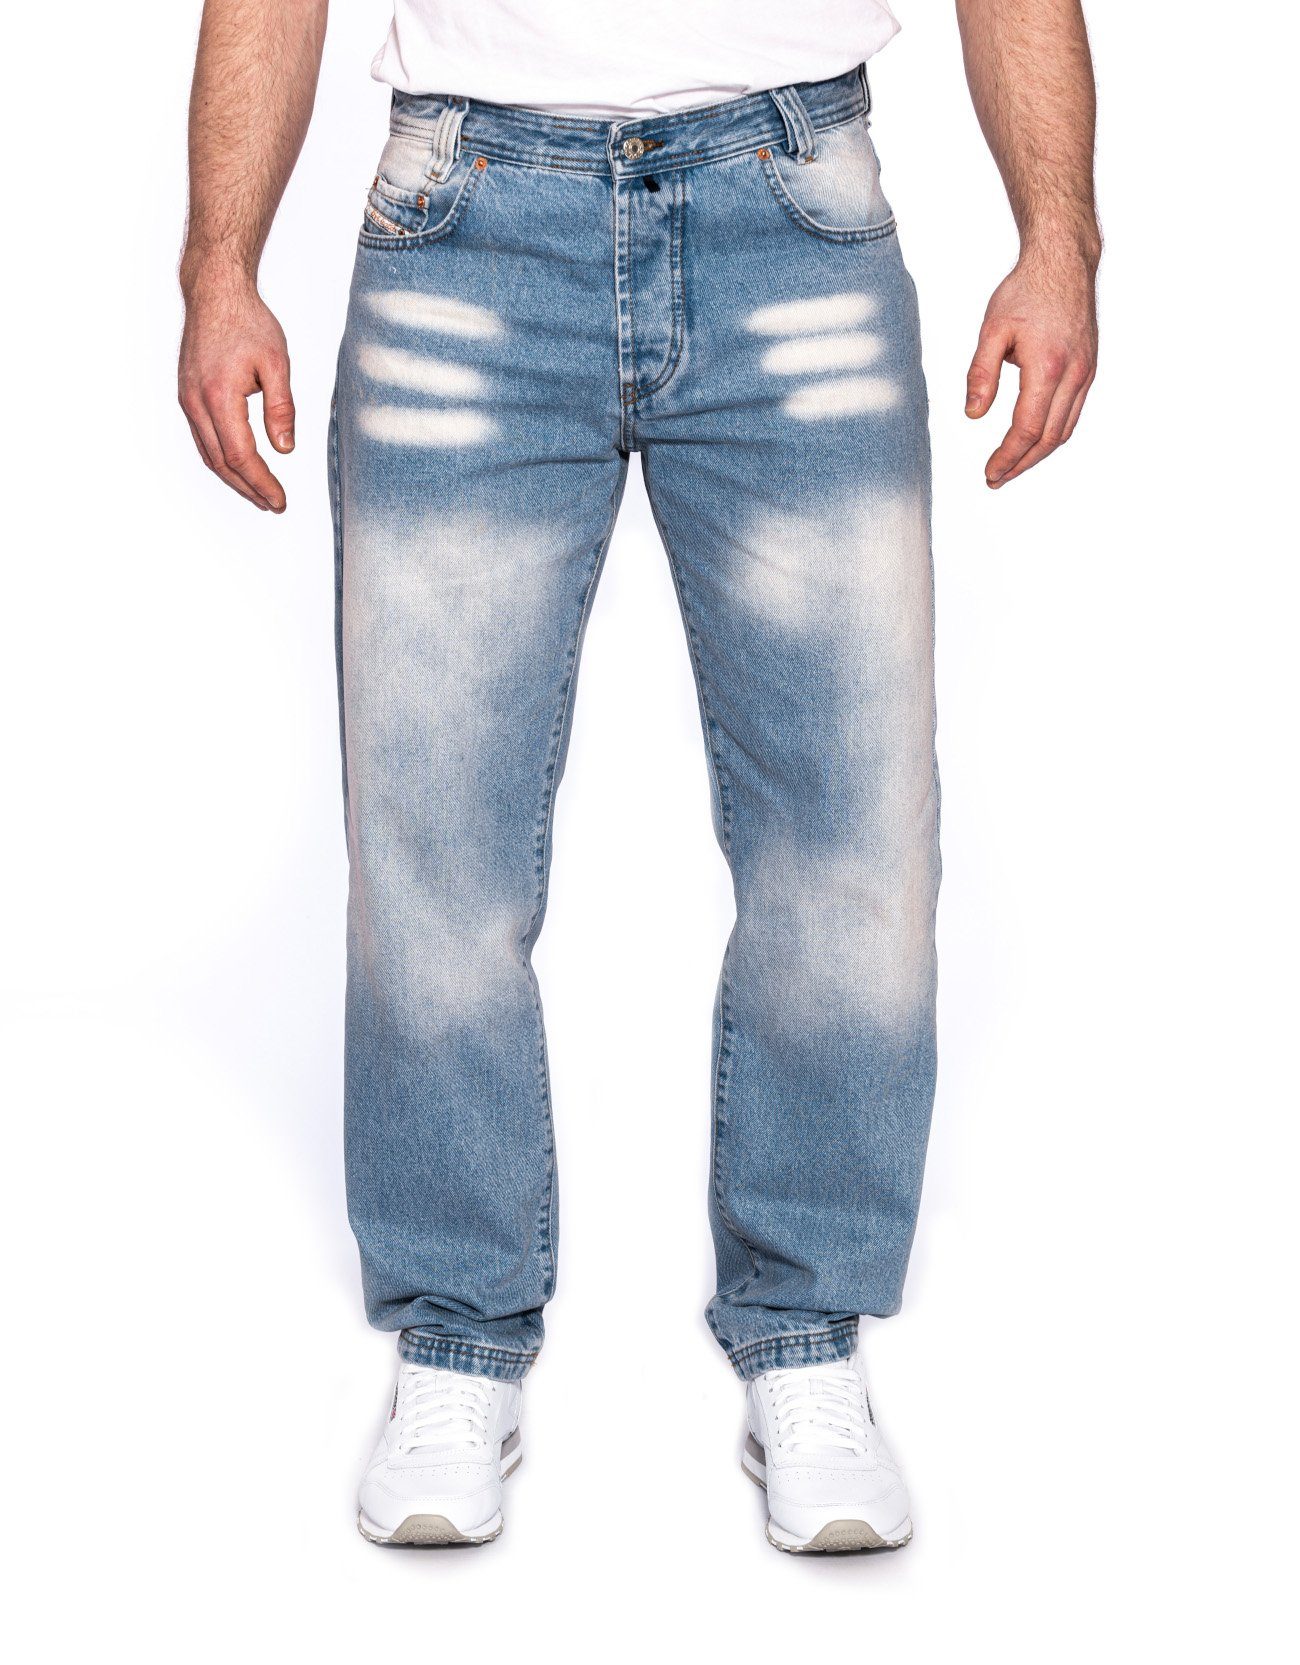 Fit 1 Jeans PICALDI Zicco Relaxed Chemie Jeans Fit, Weite Loose 472